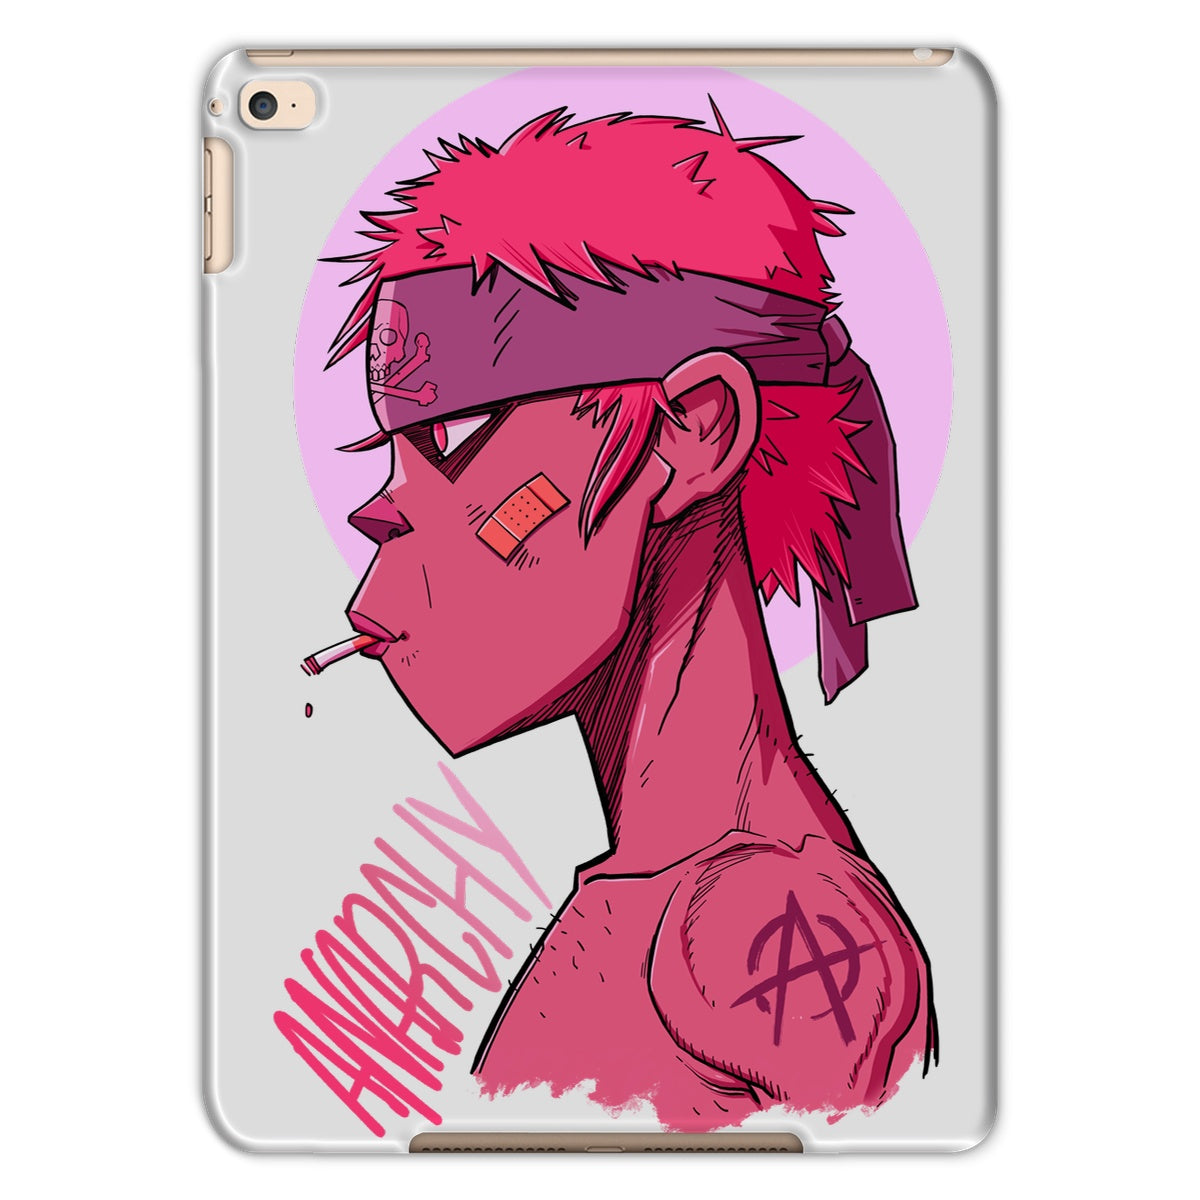 Unique and cool Gorillaz-style anarchy Tablet Case illustration 